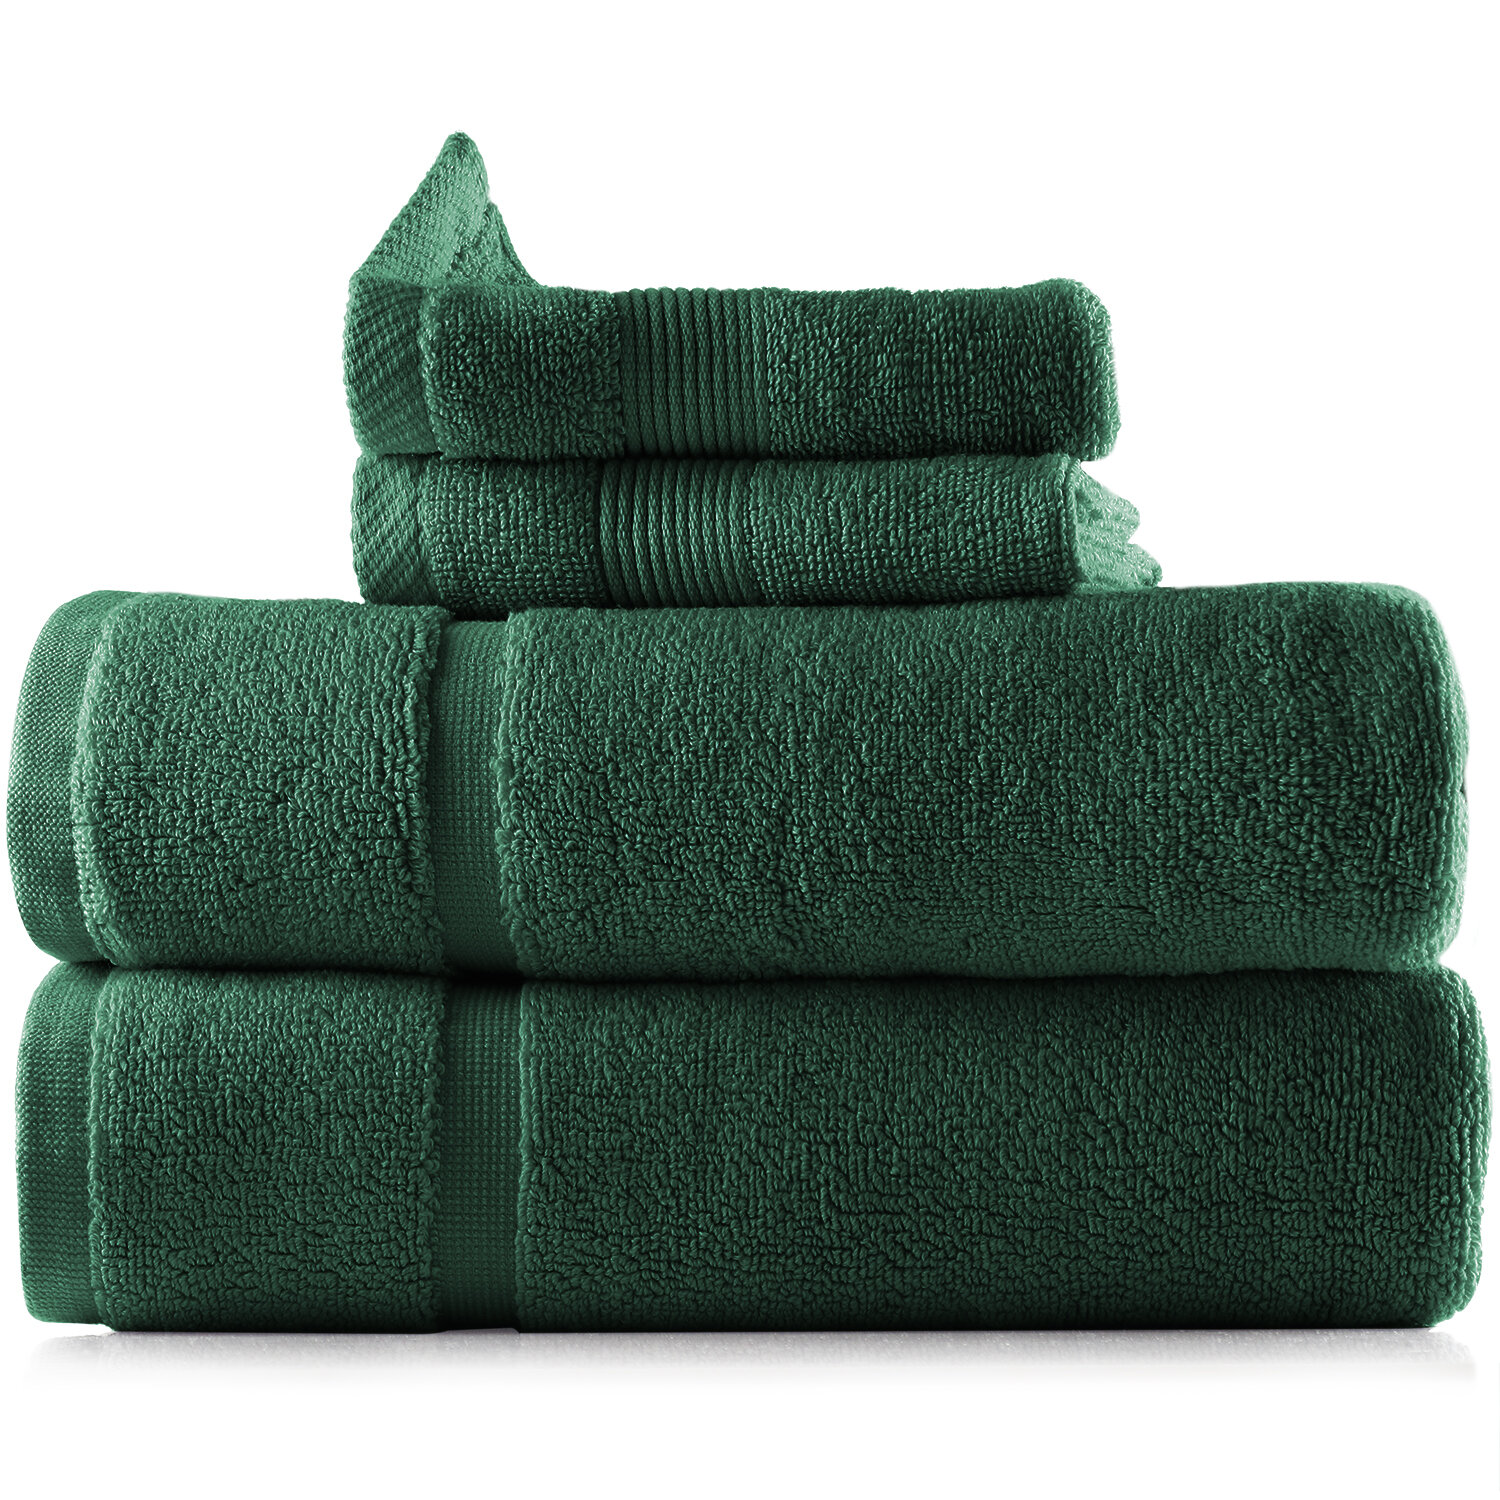 Harbor Home Egyptian Cotton Towel Collection, Bath Towels